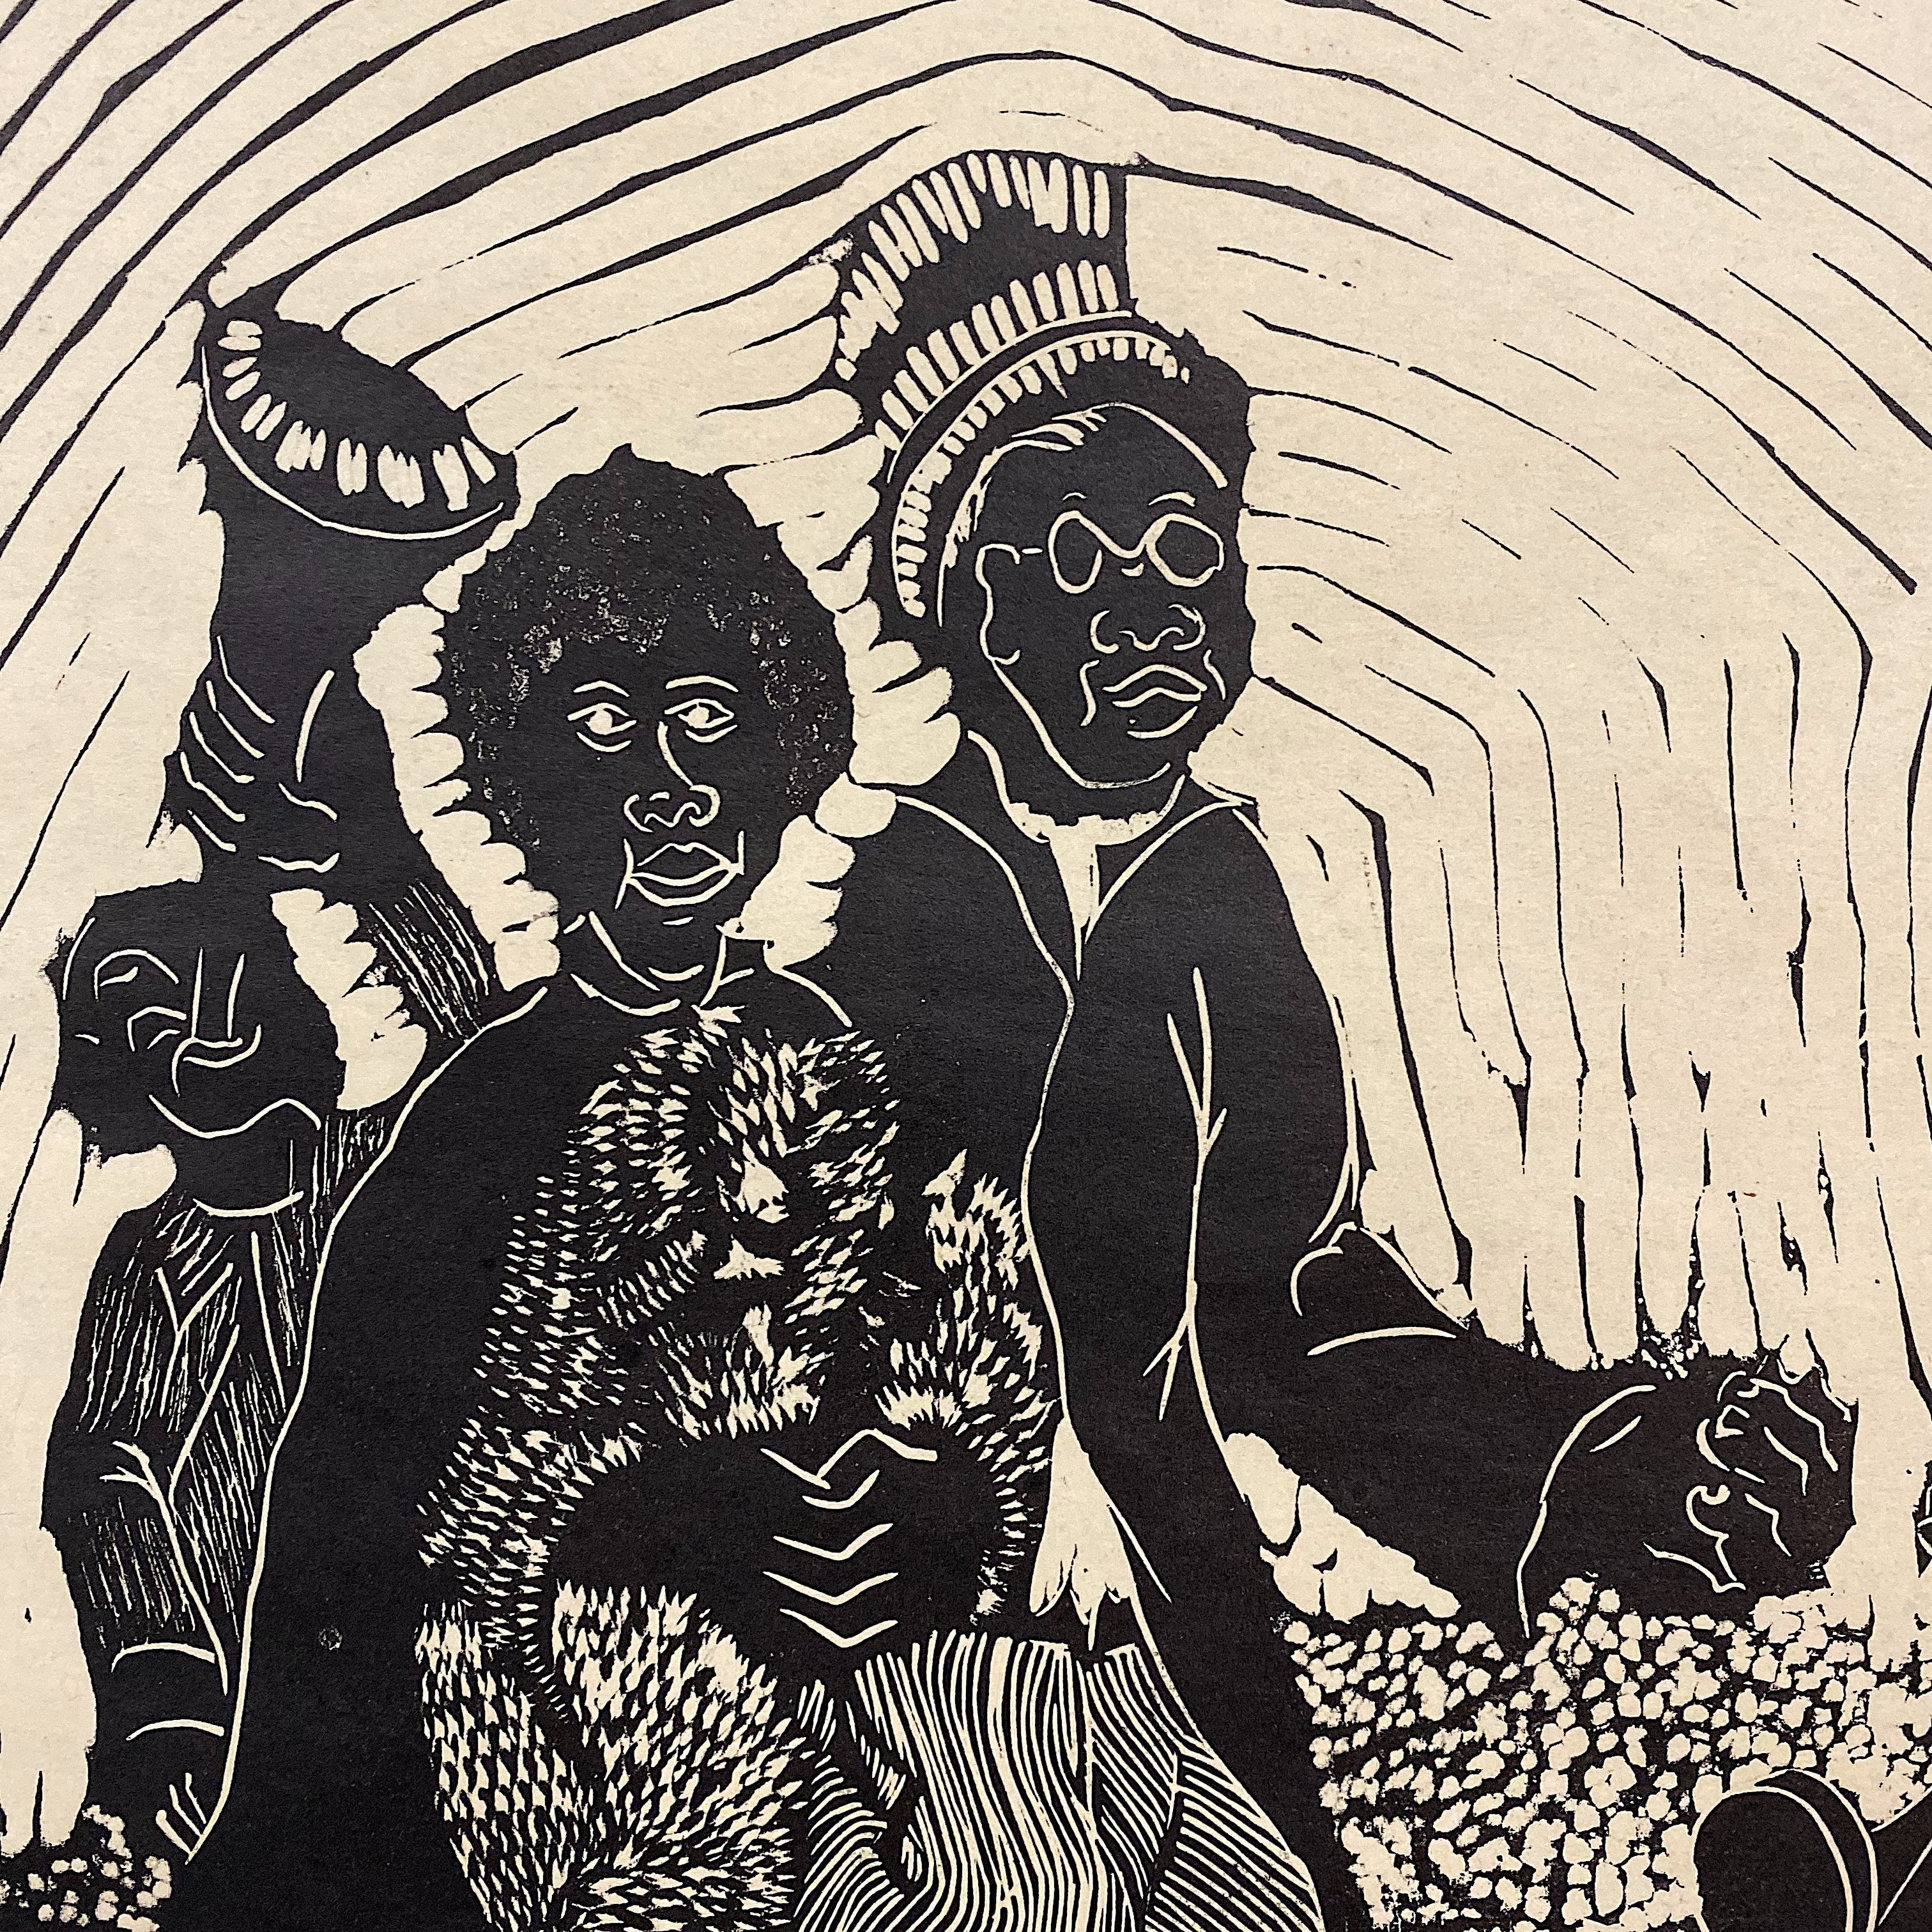 Zondi Chipa Linocut Print - Oh Happy Day - Early 1980s - Signed South African Artwork - Limited Edition 9 of 10 - Rare Woodcut - Amos